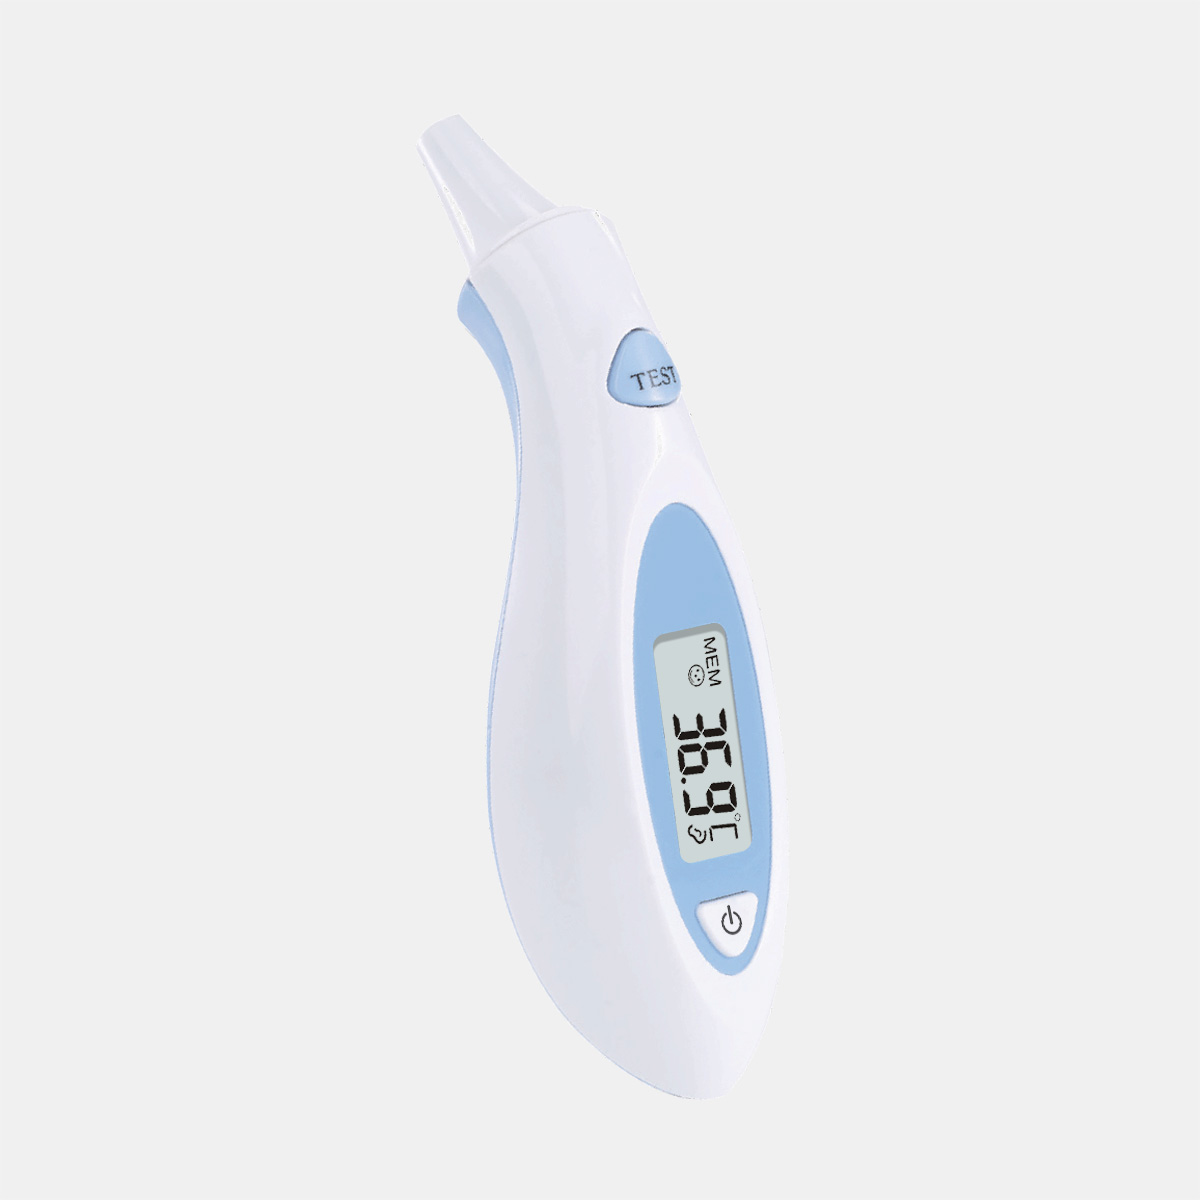 Sejoy Home Use Basic Ear Thermometer for Baby Infrared Fever Thermometer CE MDR Approval